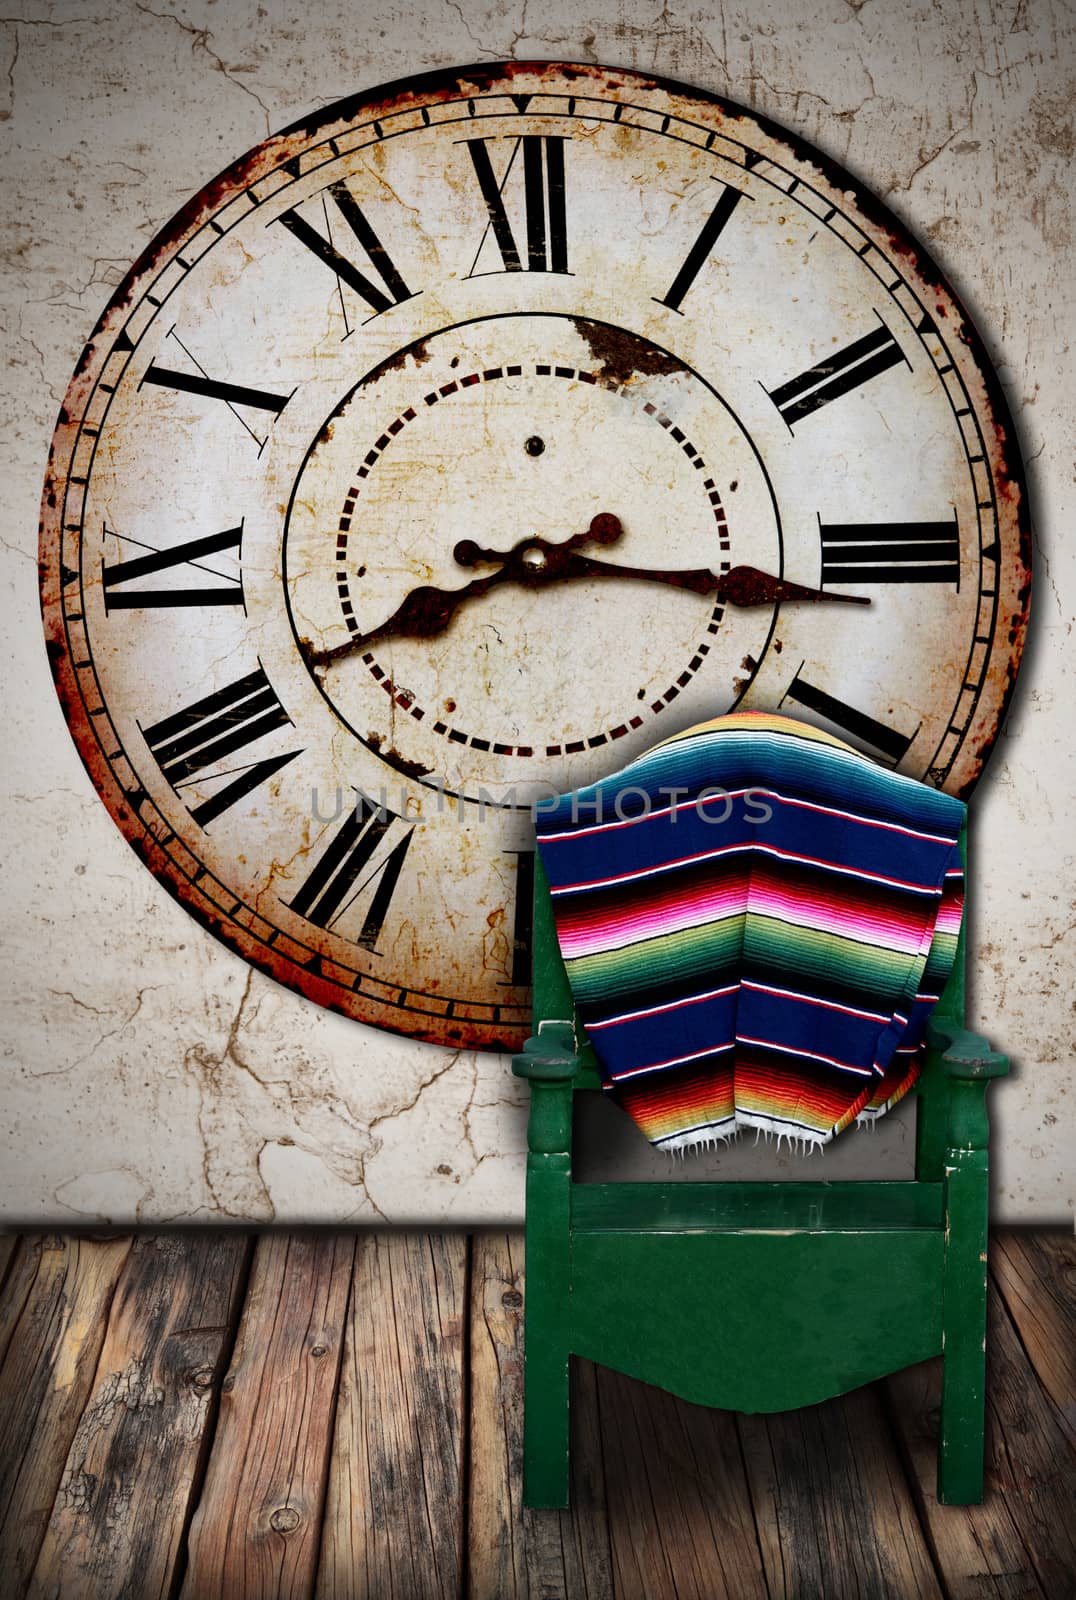 a vintage clock, a mexican chair and an old room